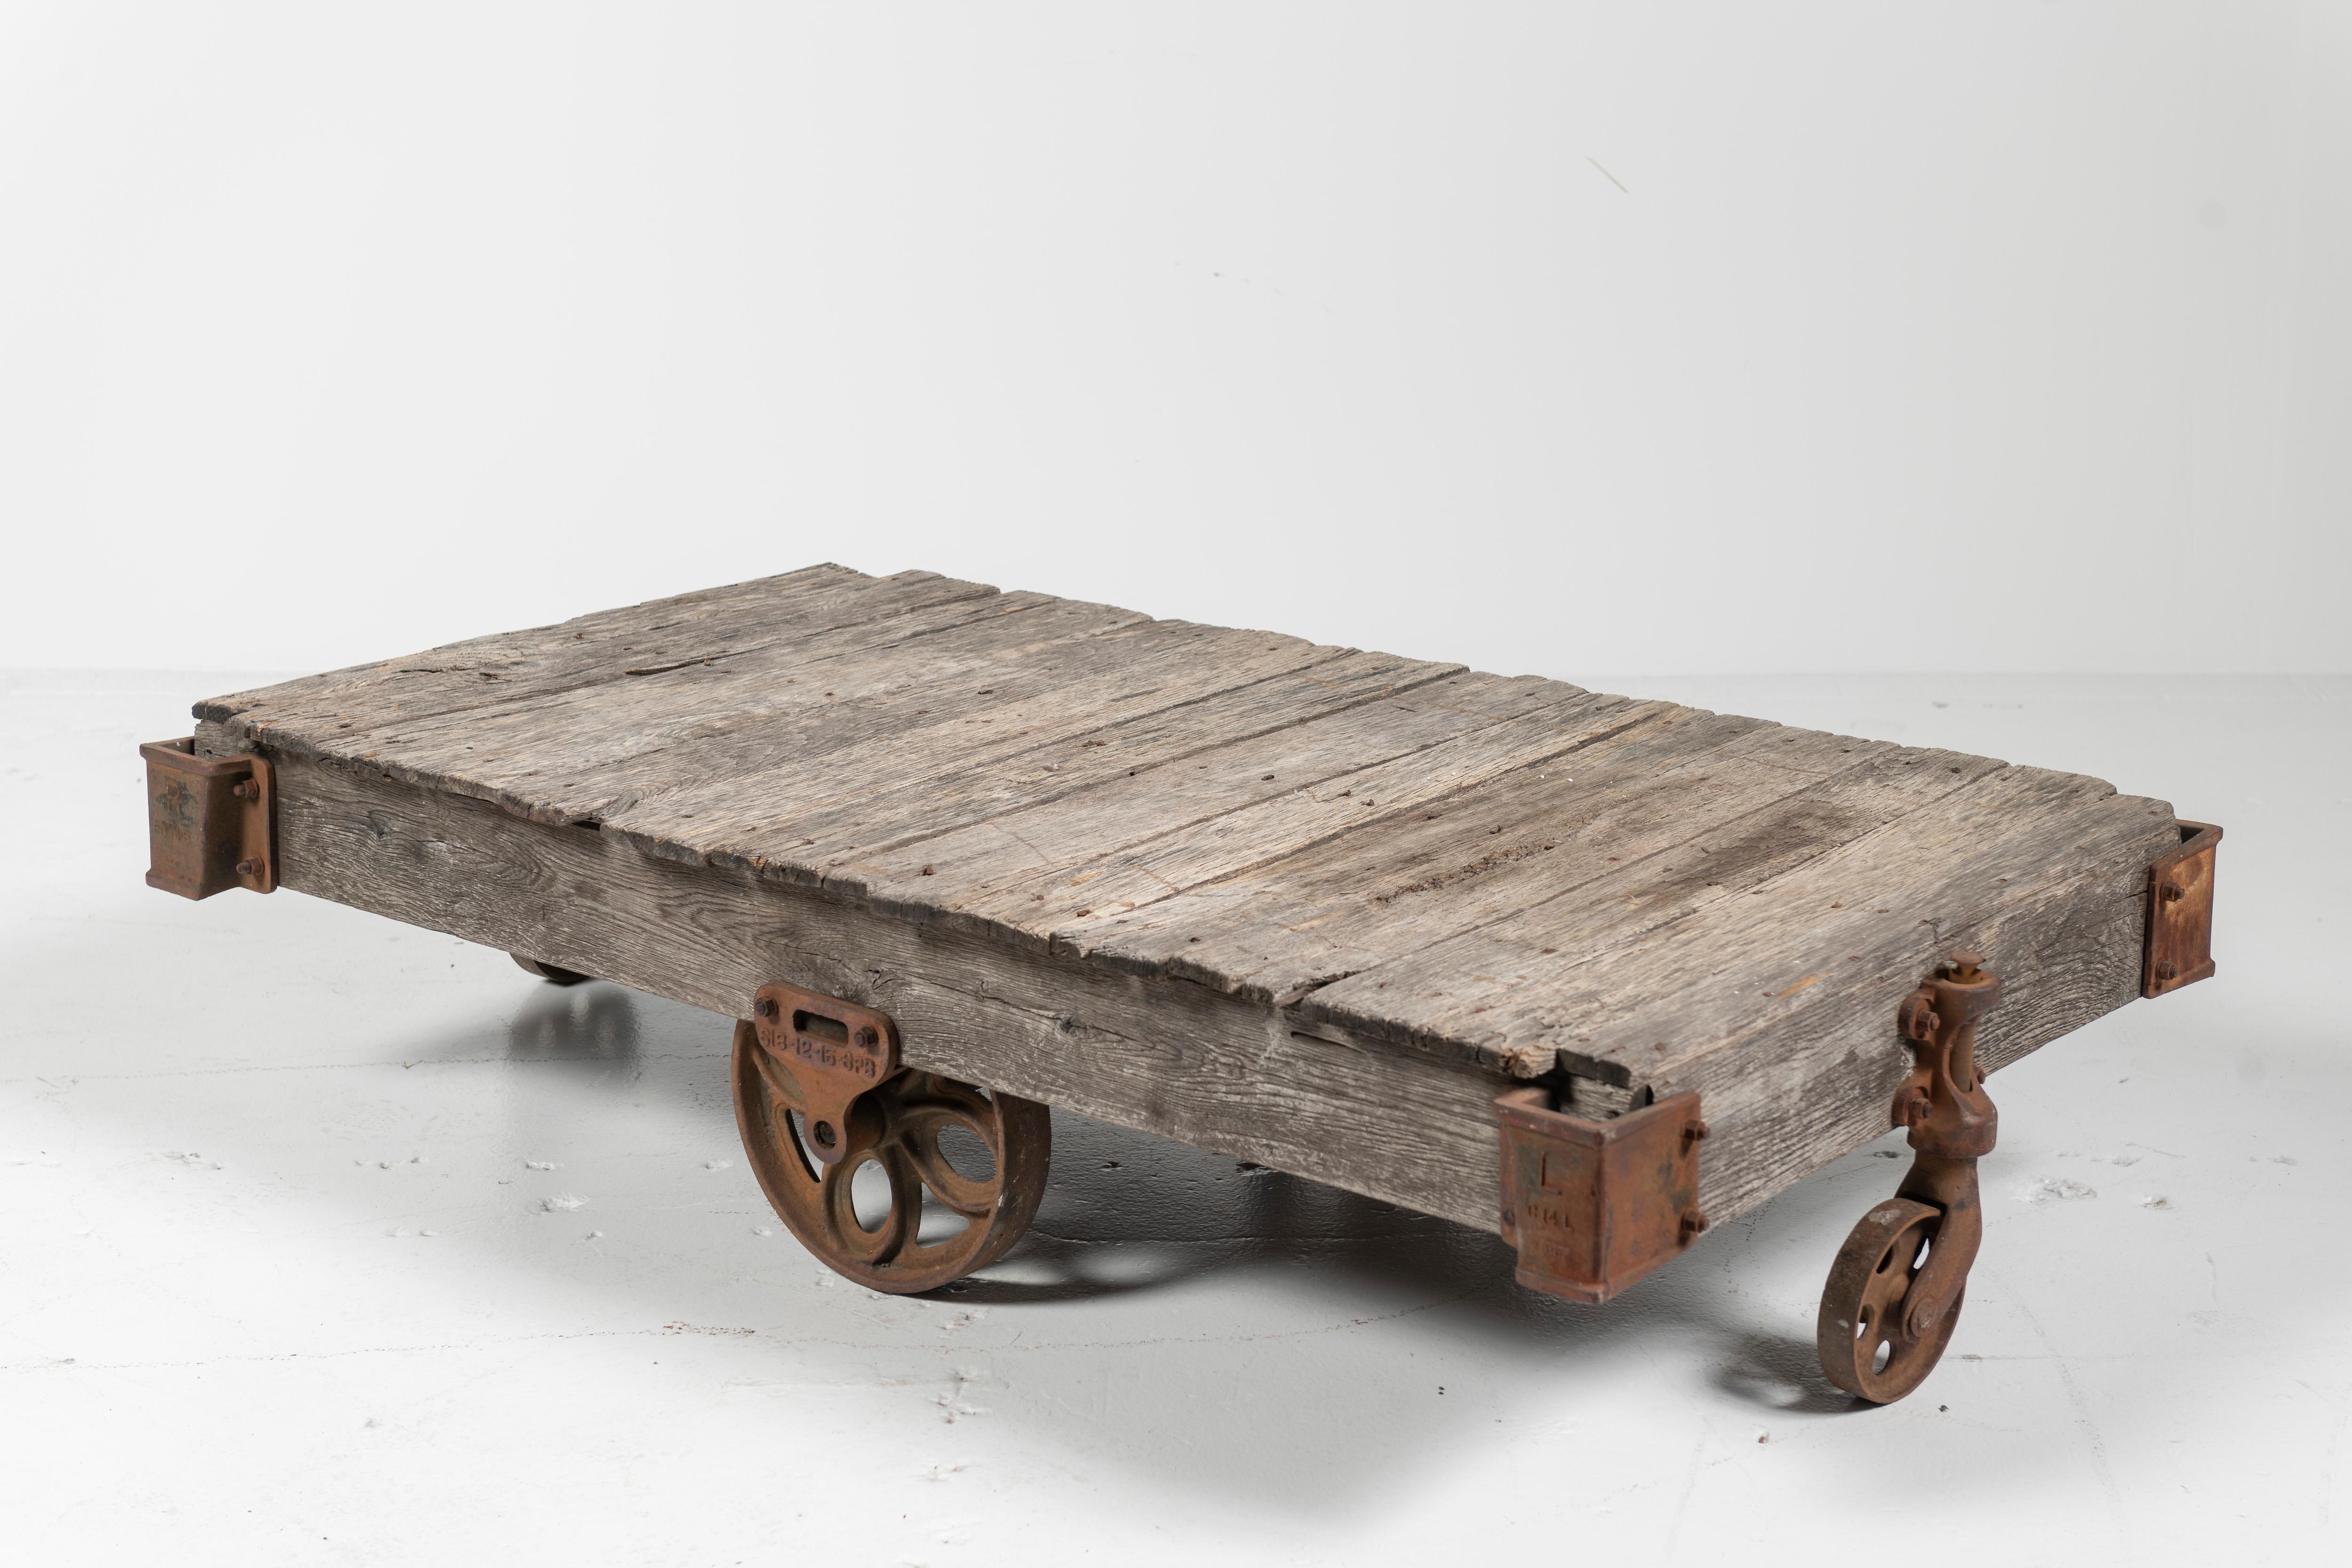 Typically, these coffee tables began as salvage carts to load and unload goods from railroads and other transporters. The carts were repurposed in the late 20th Century as coffee tables with an industrial edge. The cast iron wheels and corners are